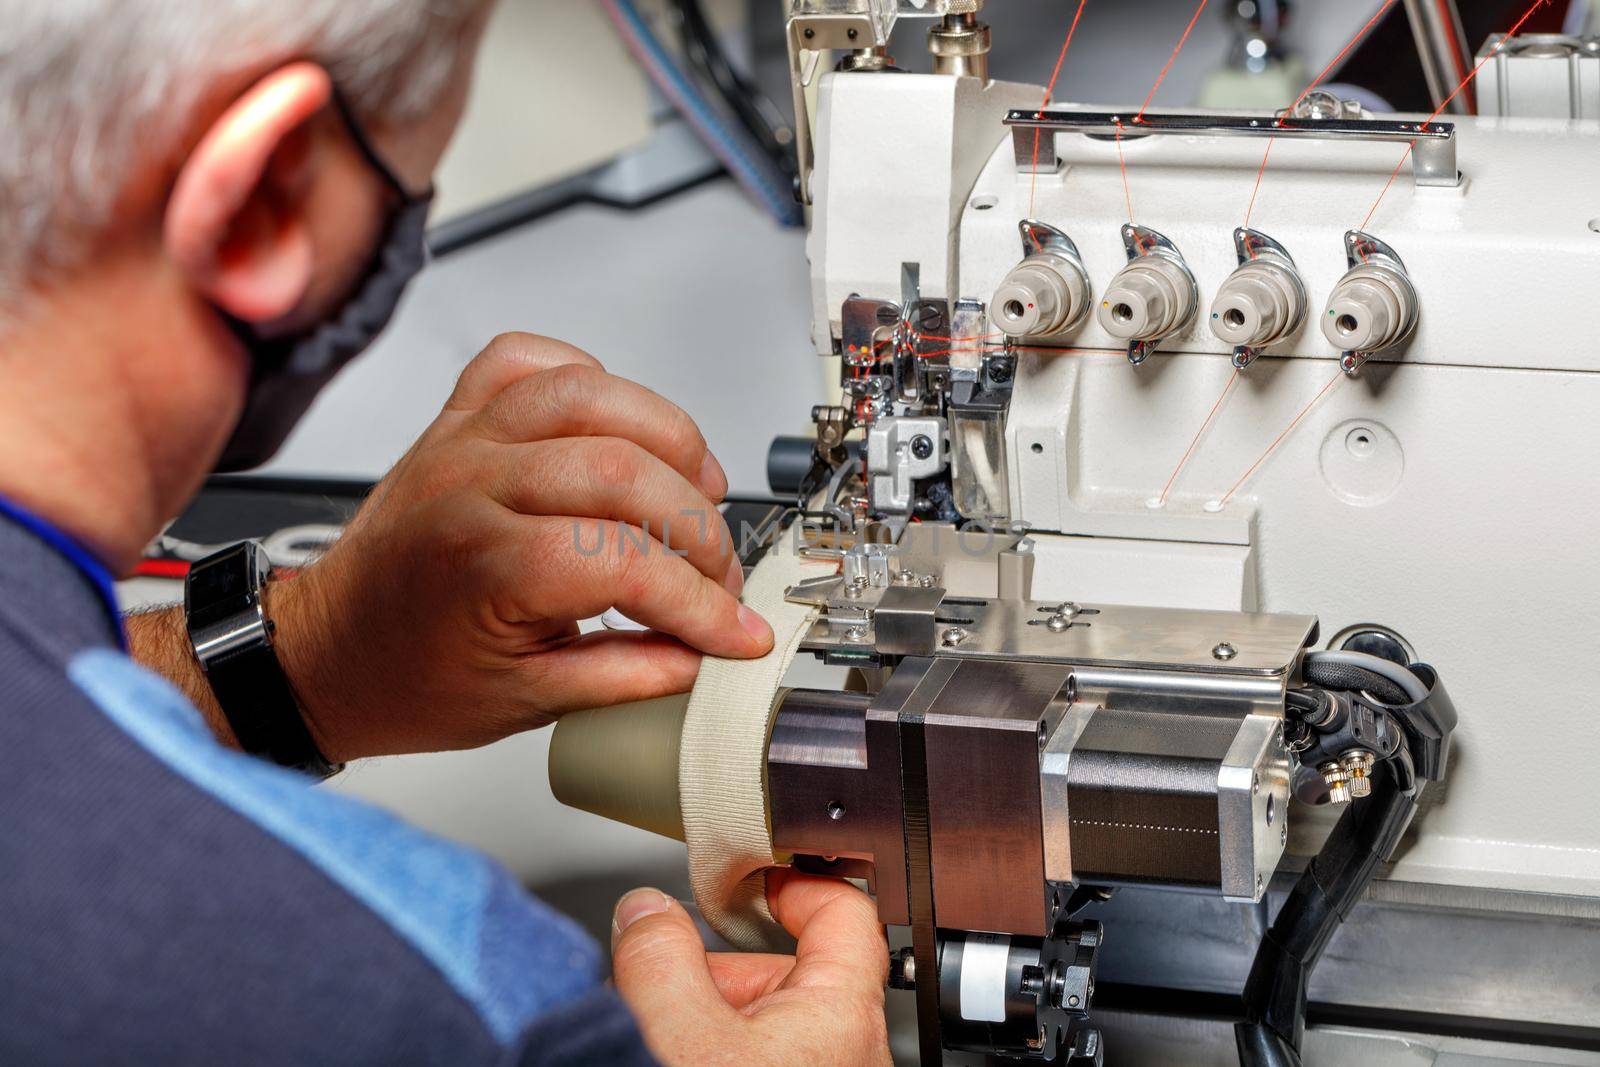 The hands of an old master set up a modern electric sewing machine and check the quality of the stitching.